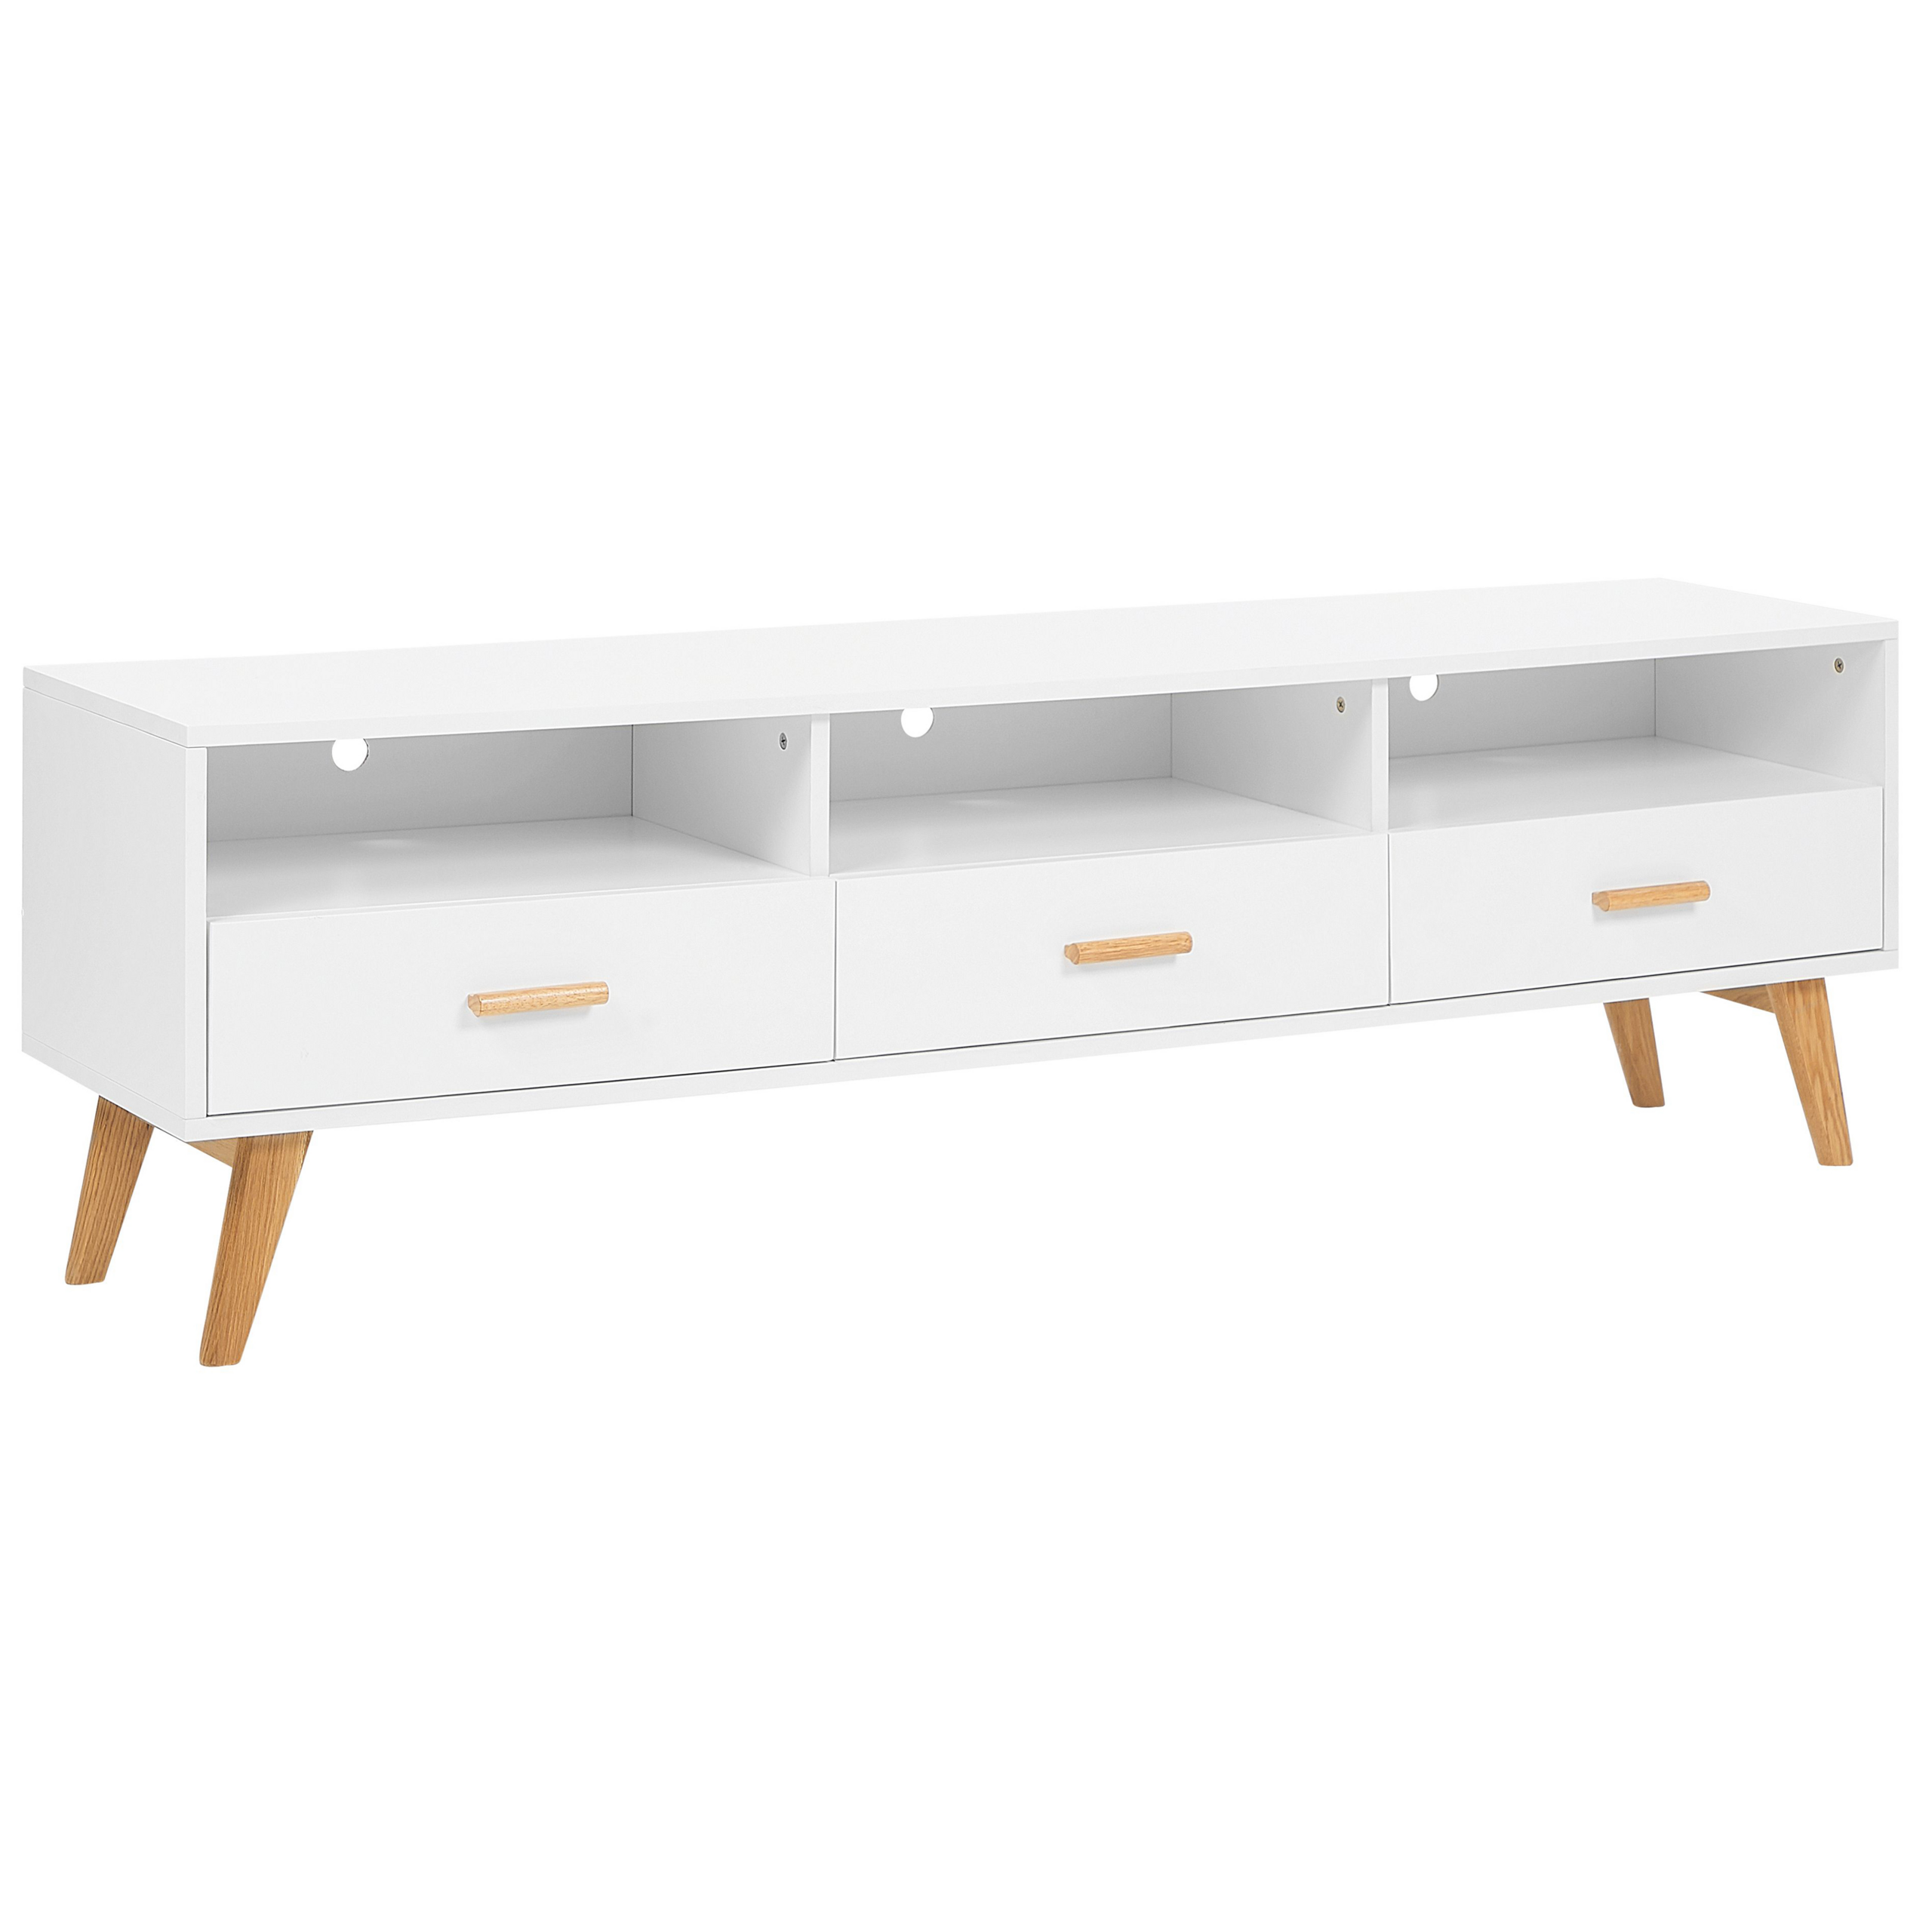 Beliani TV Stand White with Light Wood 55 x 180 x 40 cm Media Unit with Shelves and Drawers